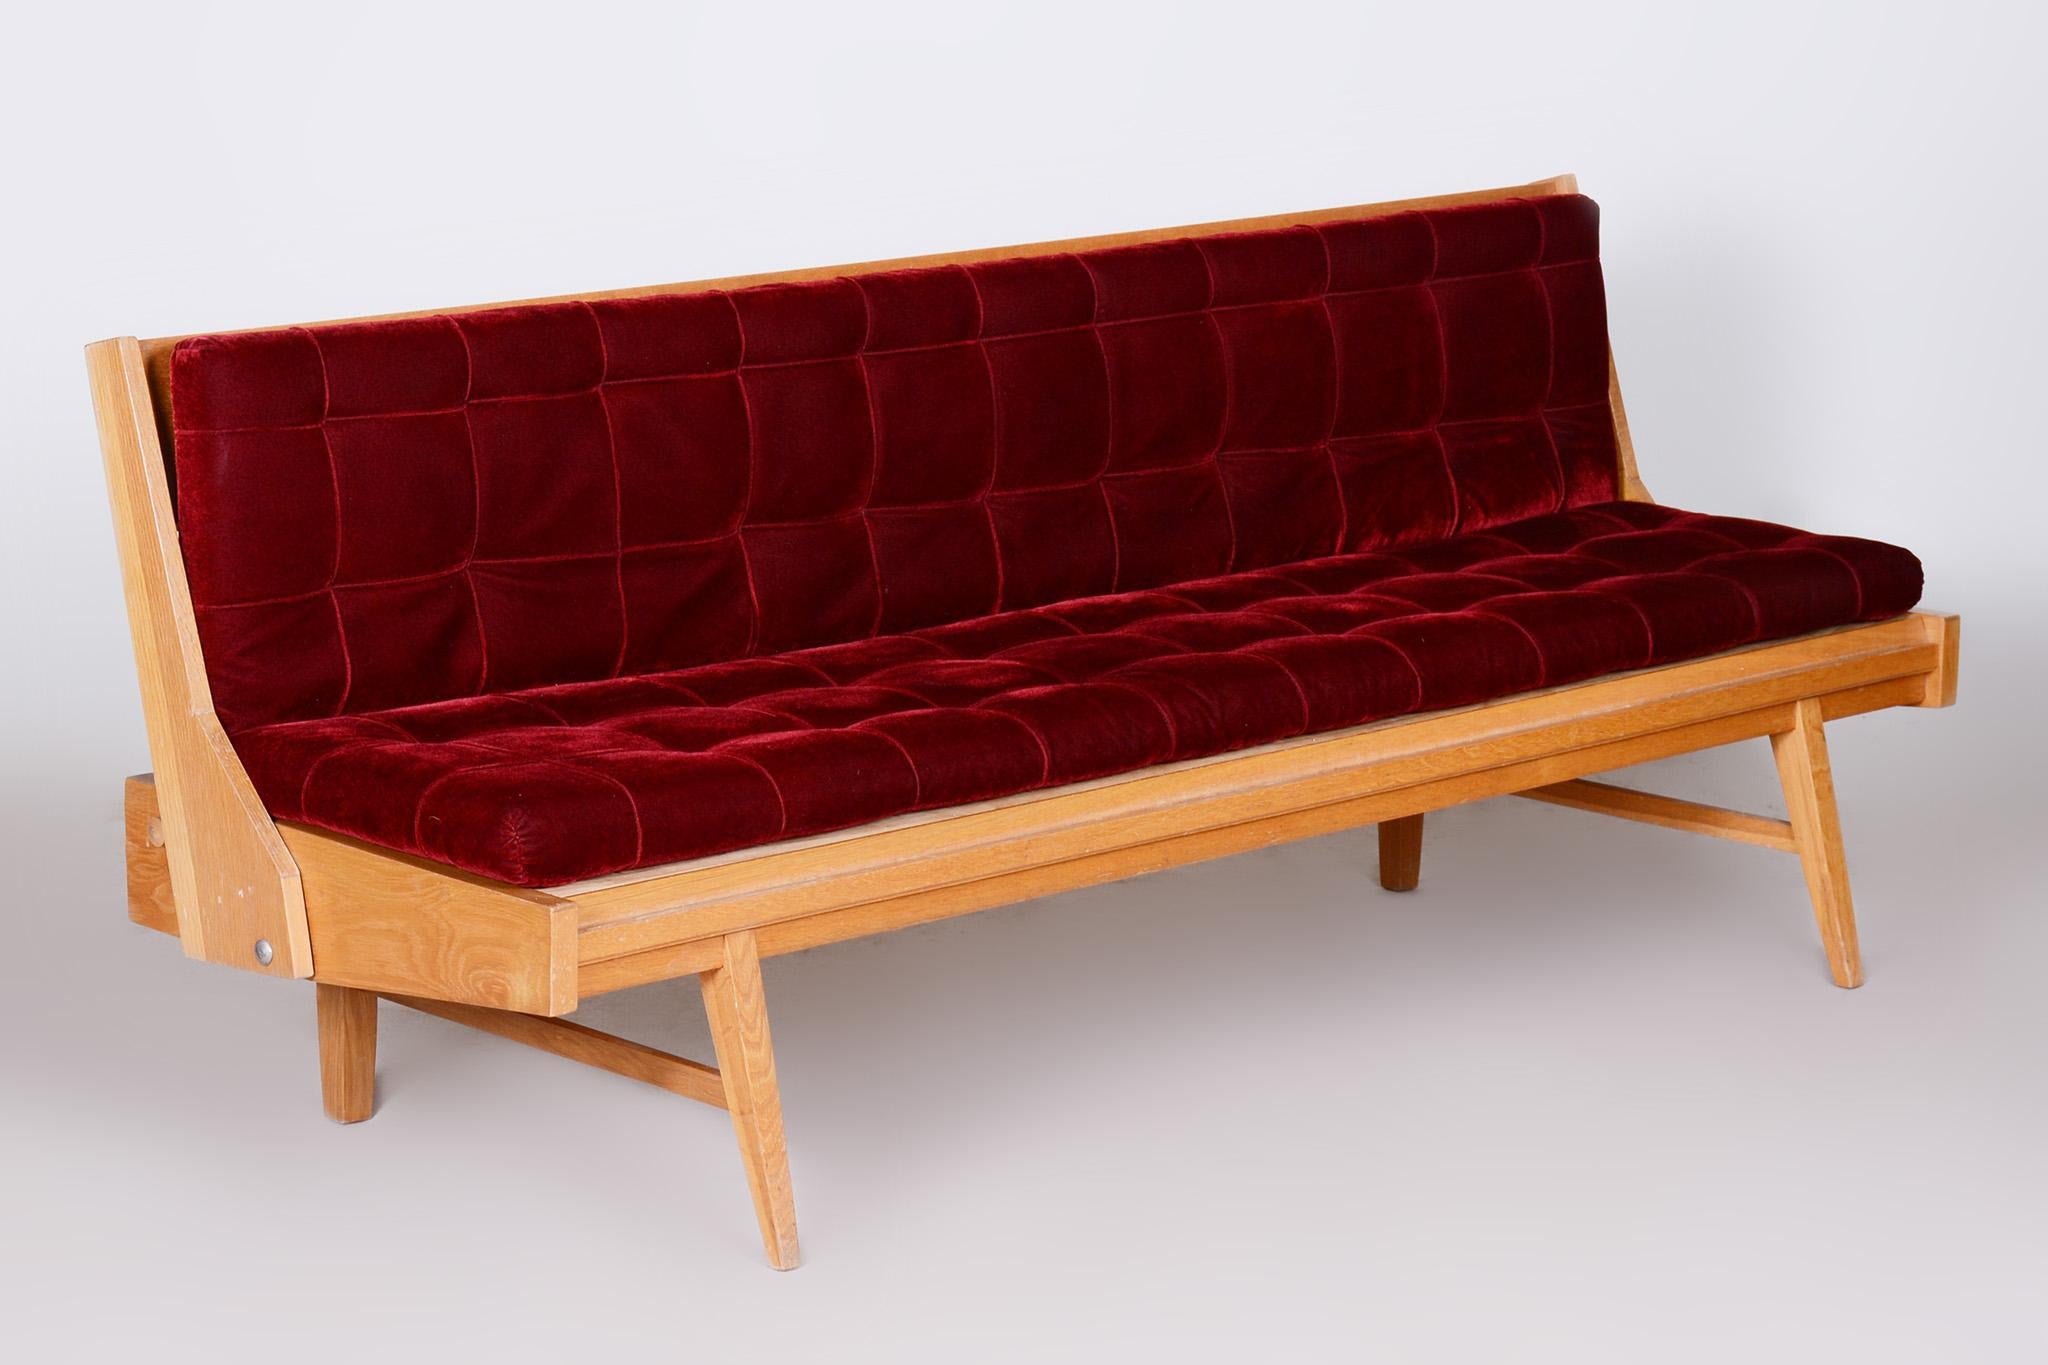 Red Mid-Century Modern Oak Sofa, 1950s, Original Well Preserved Upholstery For Sale 4